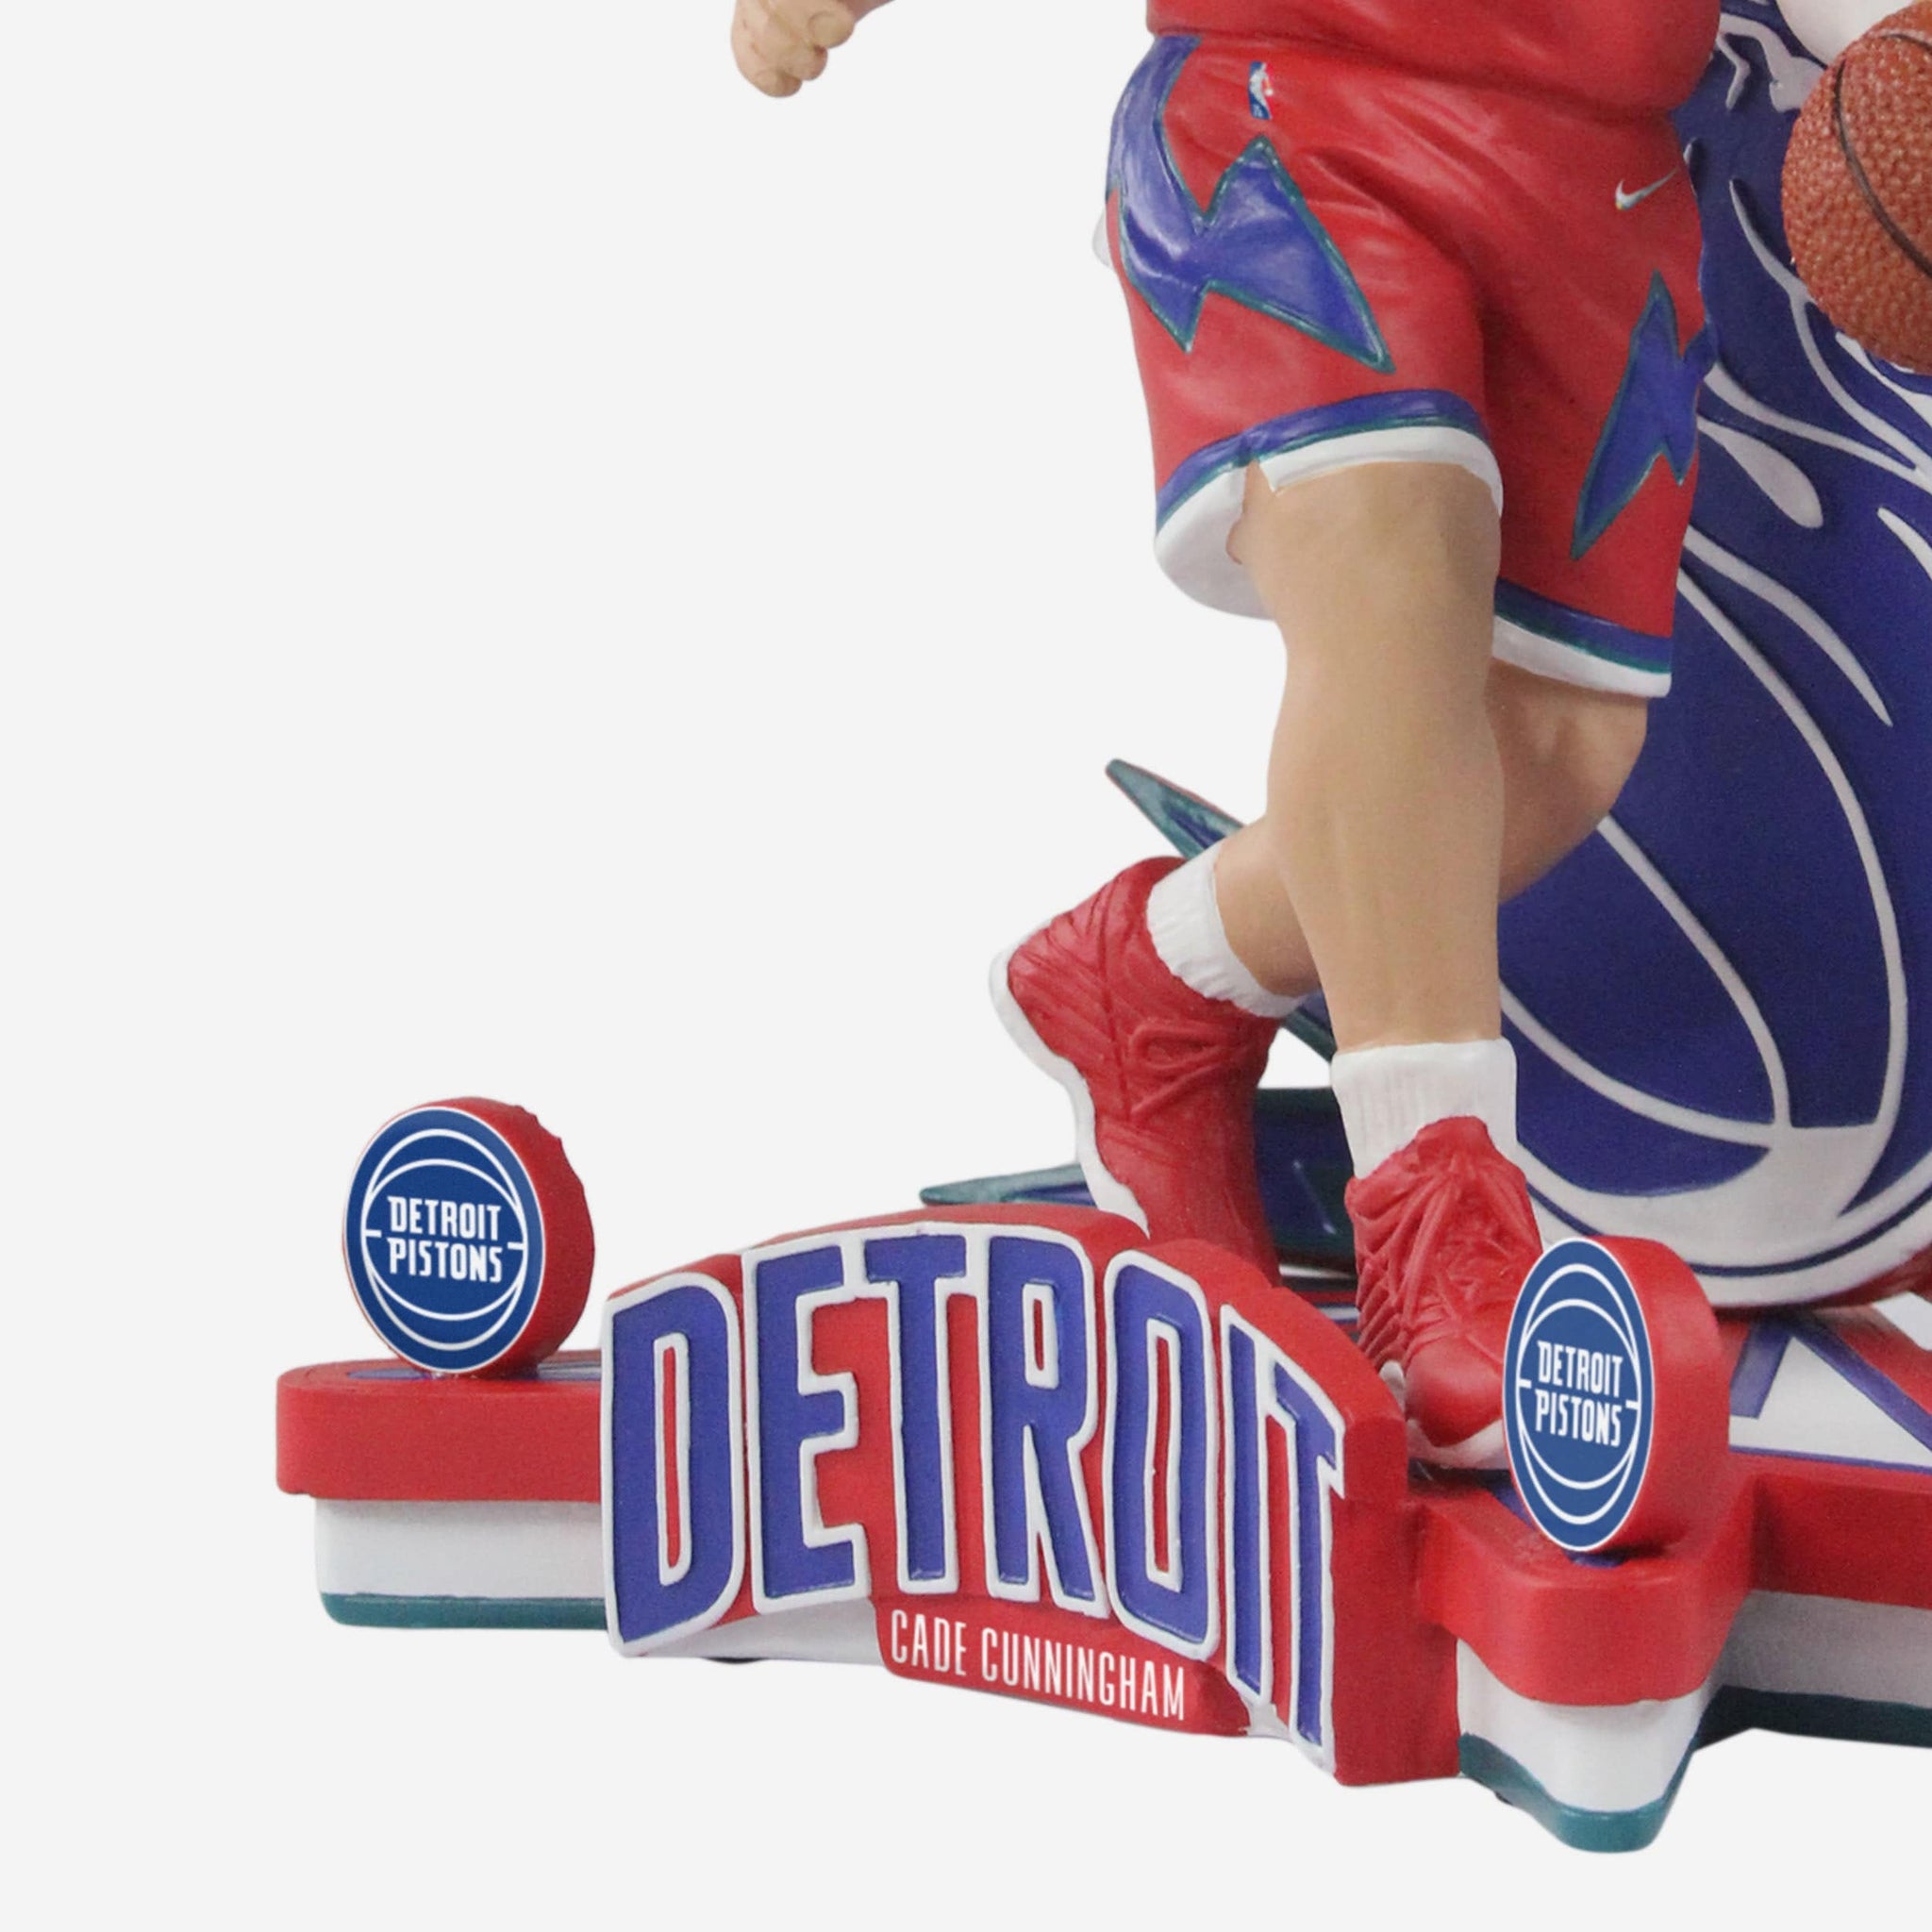 Cade Cunningham Detroit Pistons 2023 City Jersey Bobblehead Officially Licensed by NBA